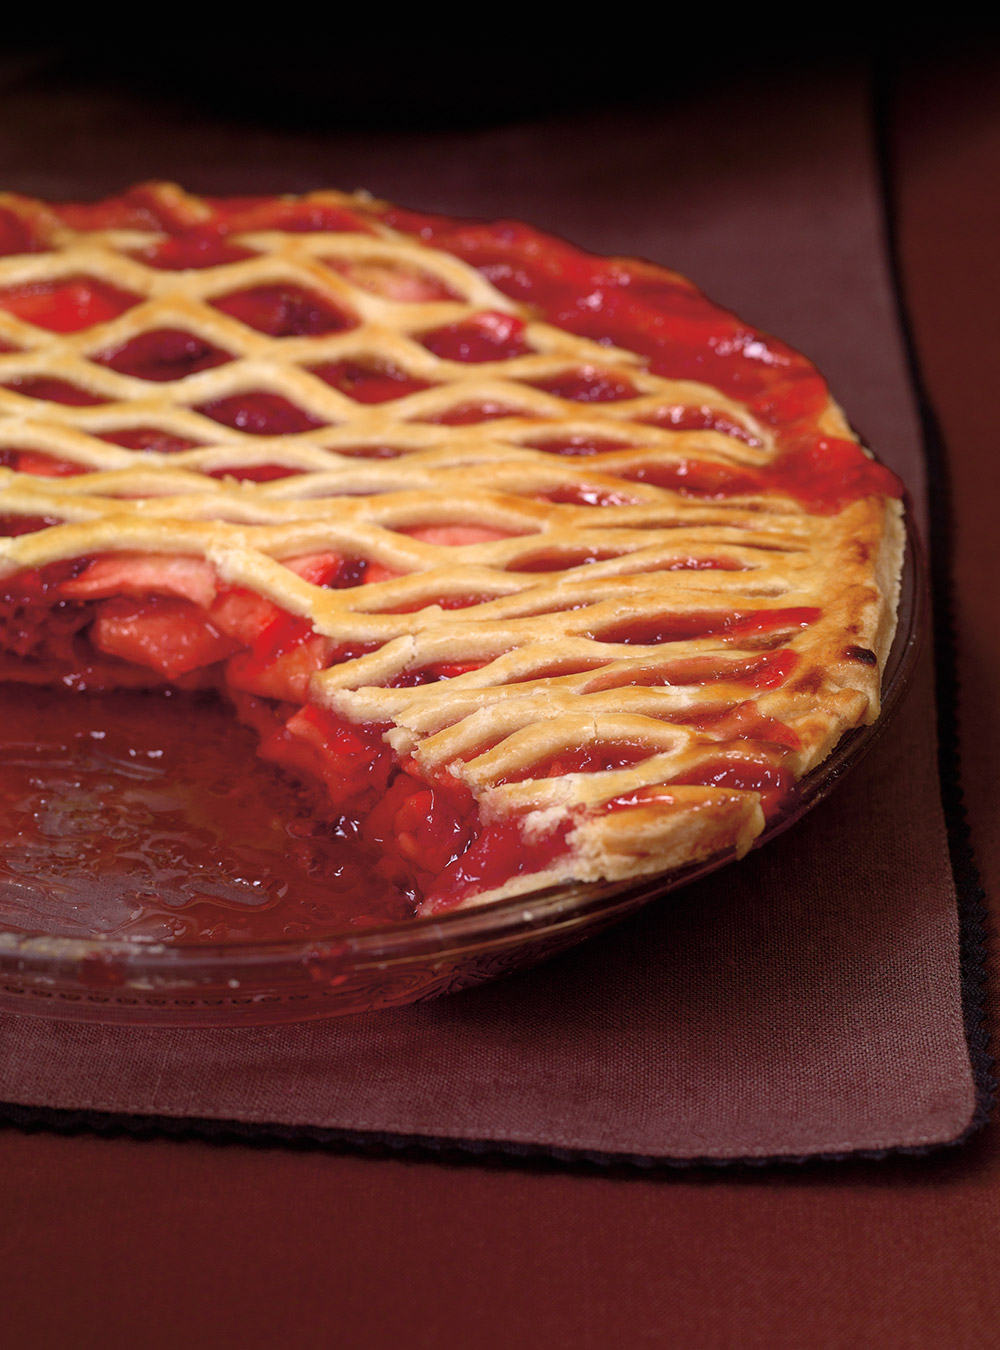 Apple and Strawberry Pie